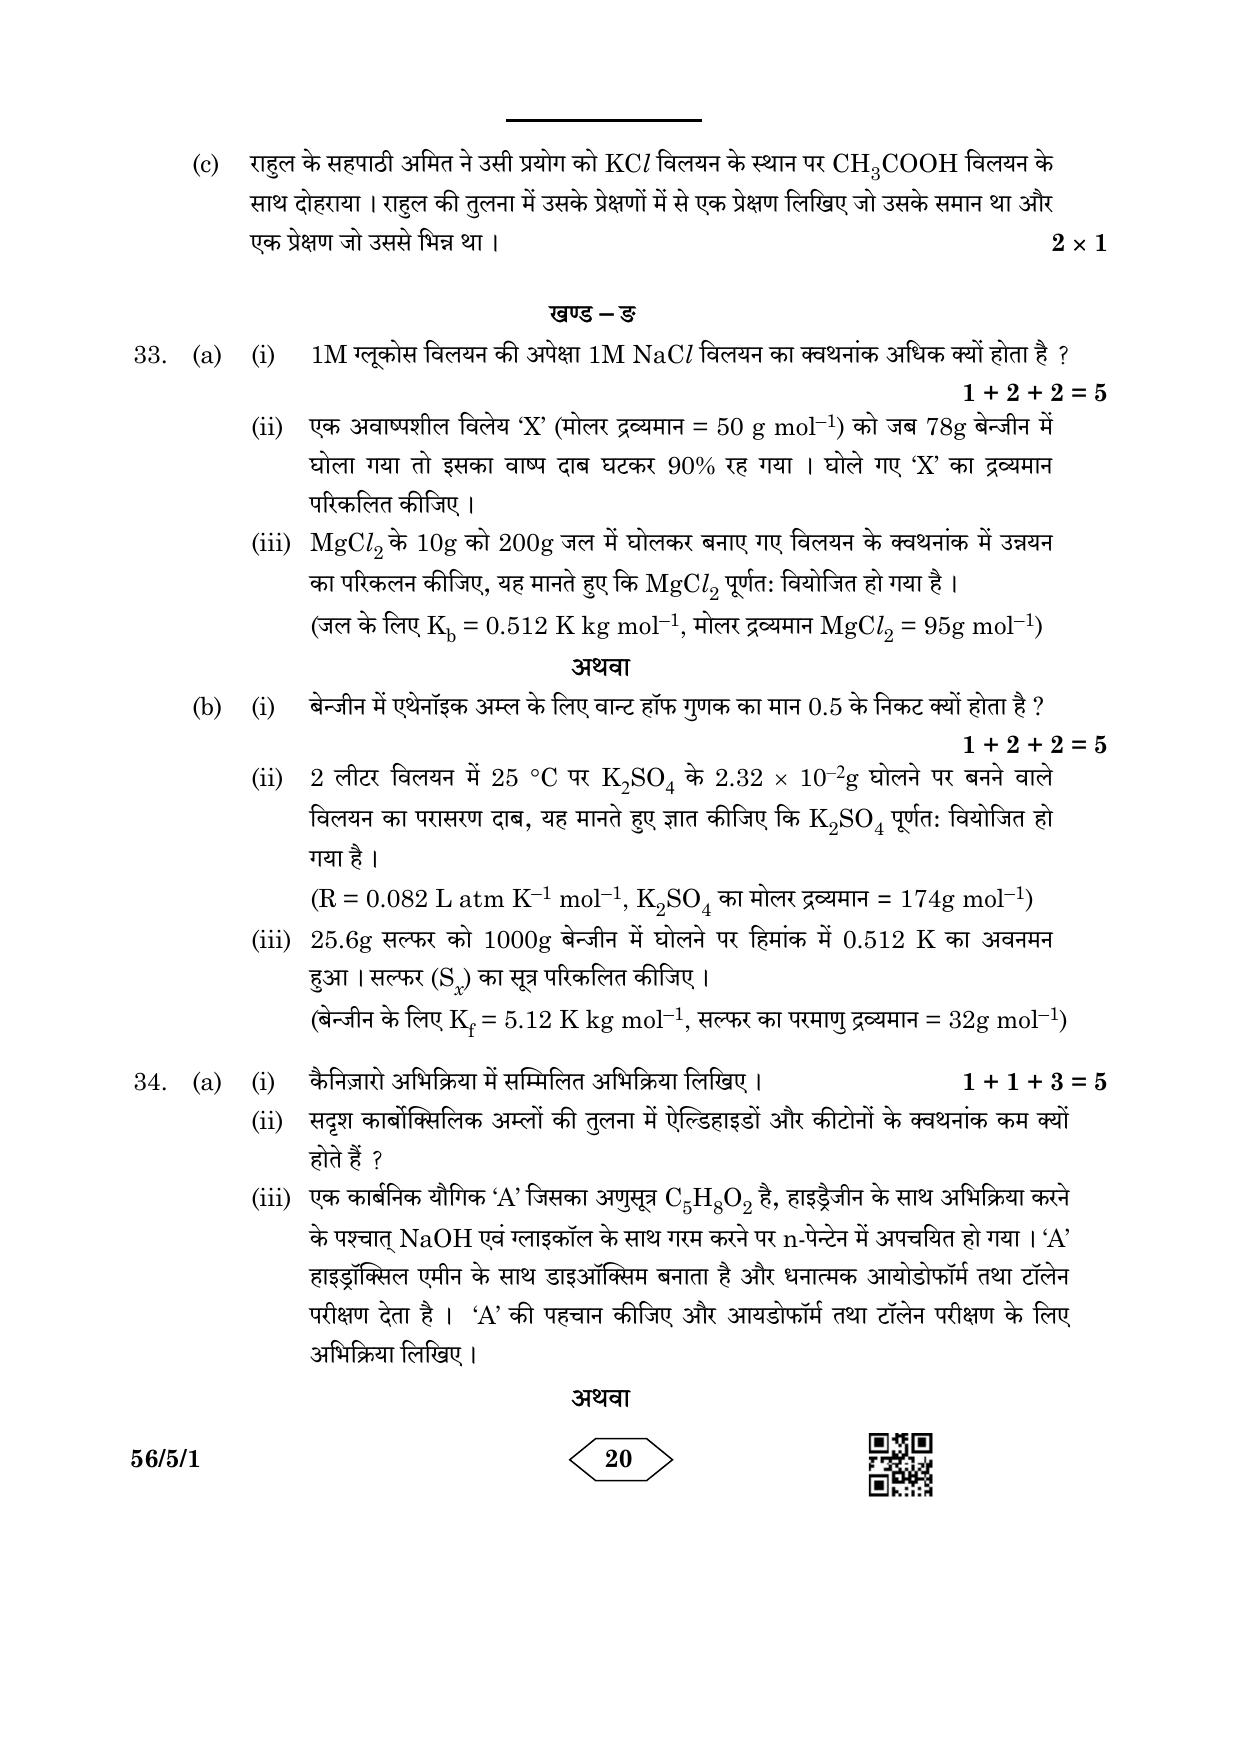 CBSE Class 12 56-5-1 Chemistry 2023 Question Paper - Page 20